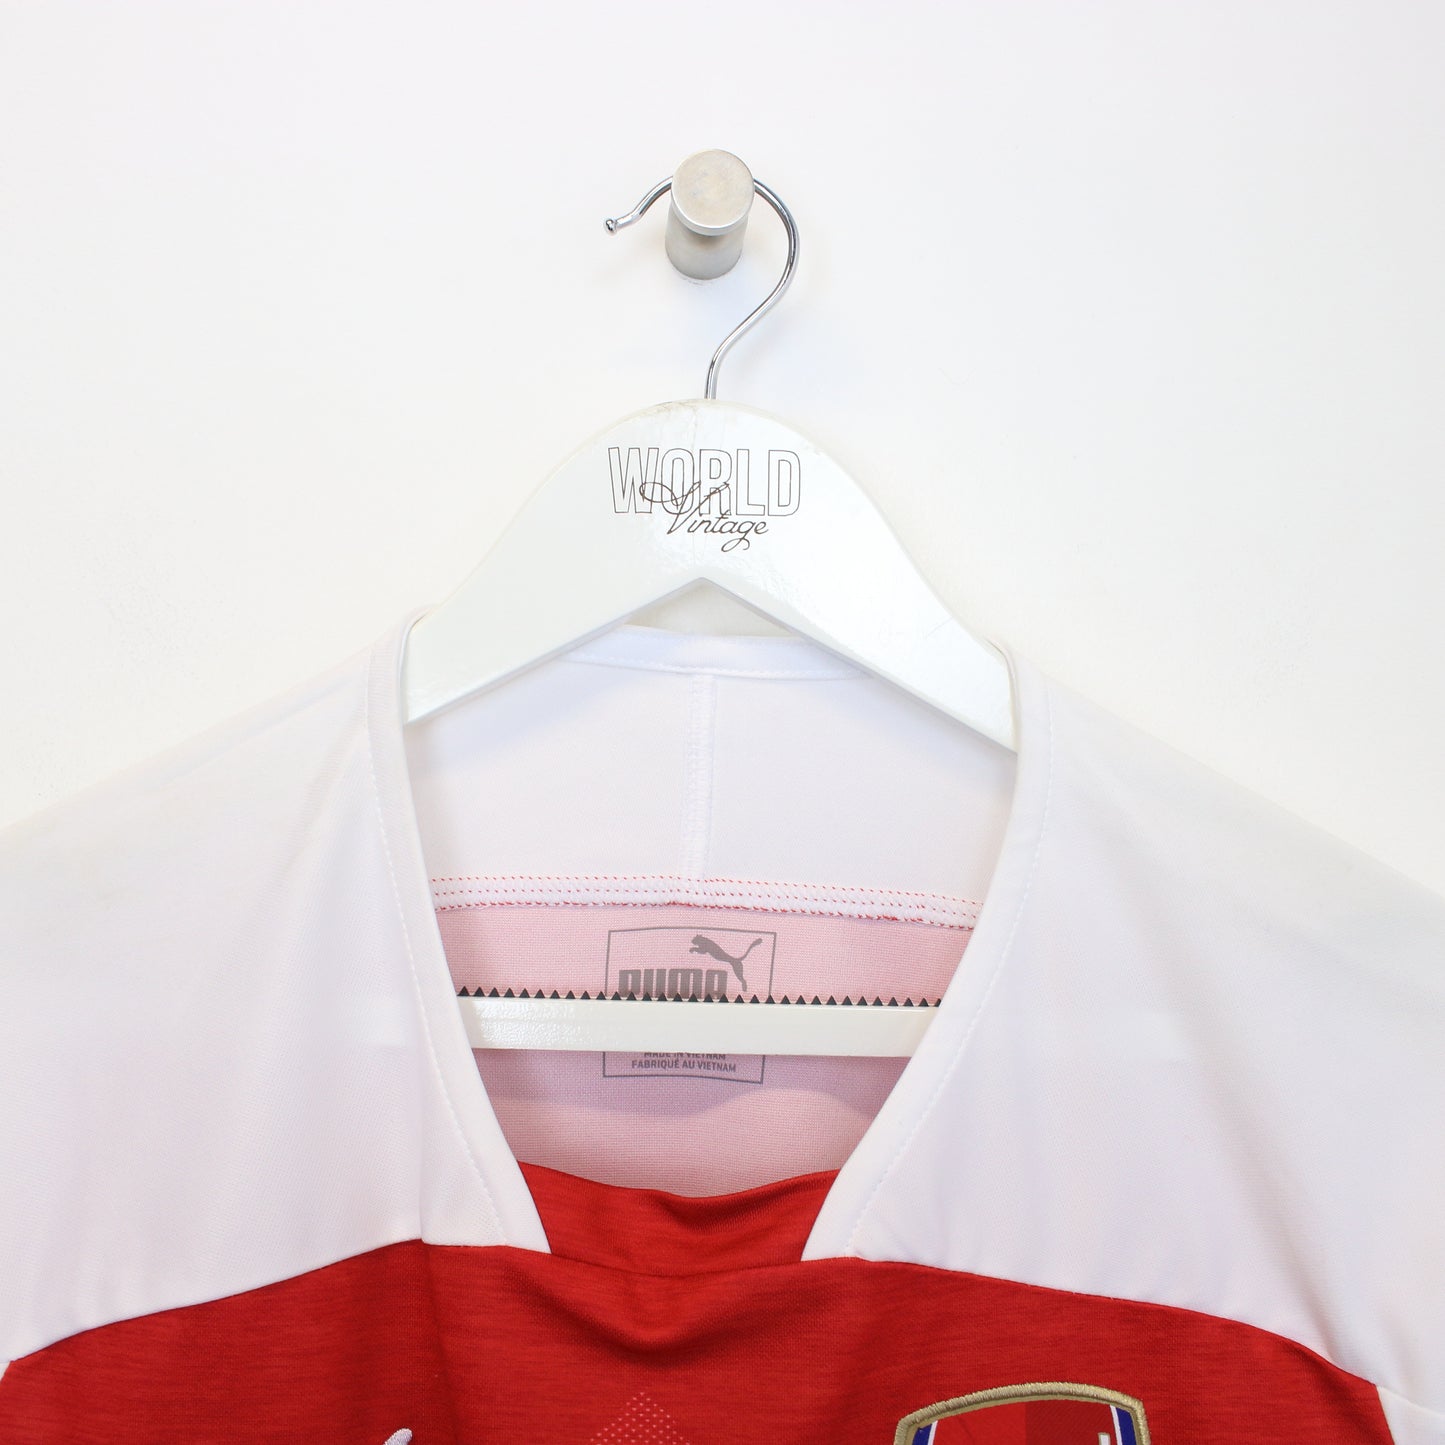 Vintage Arsenal football shirt in red. Best fits S